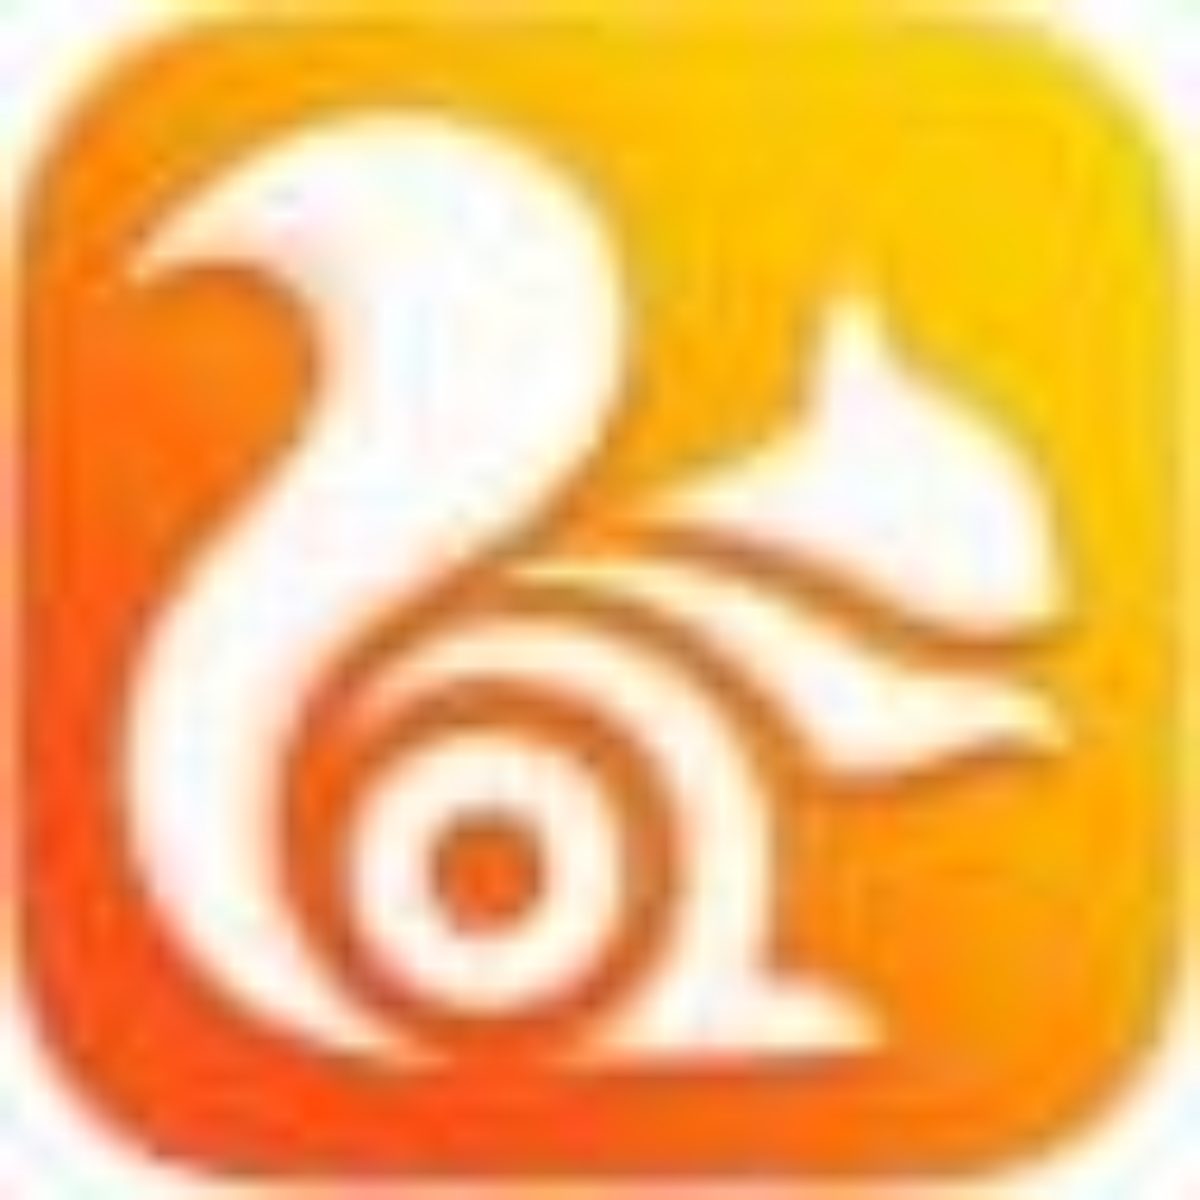 uc browser for pc